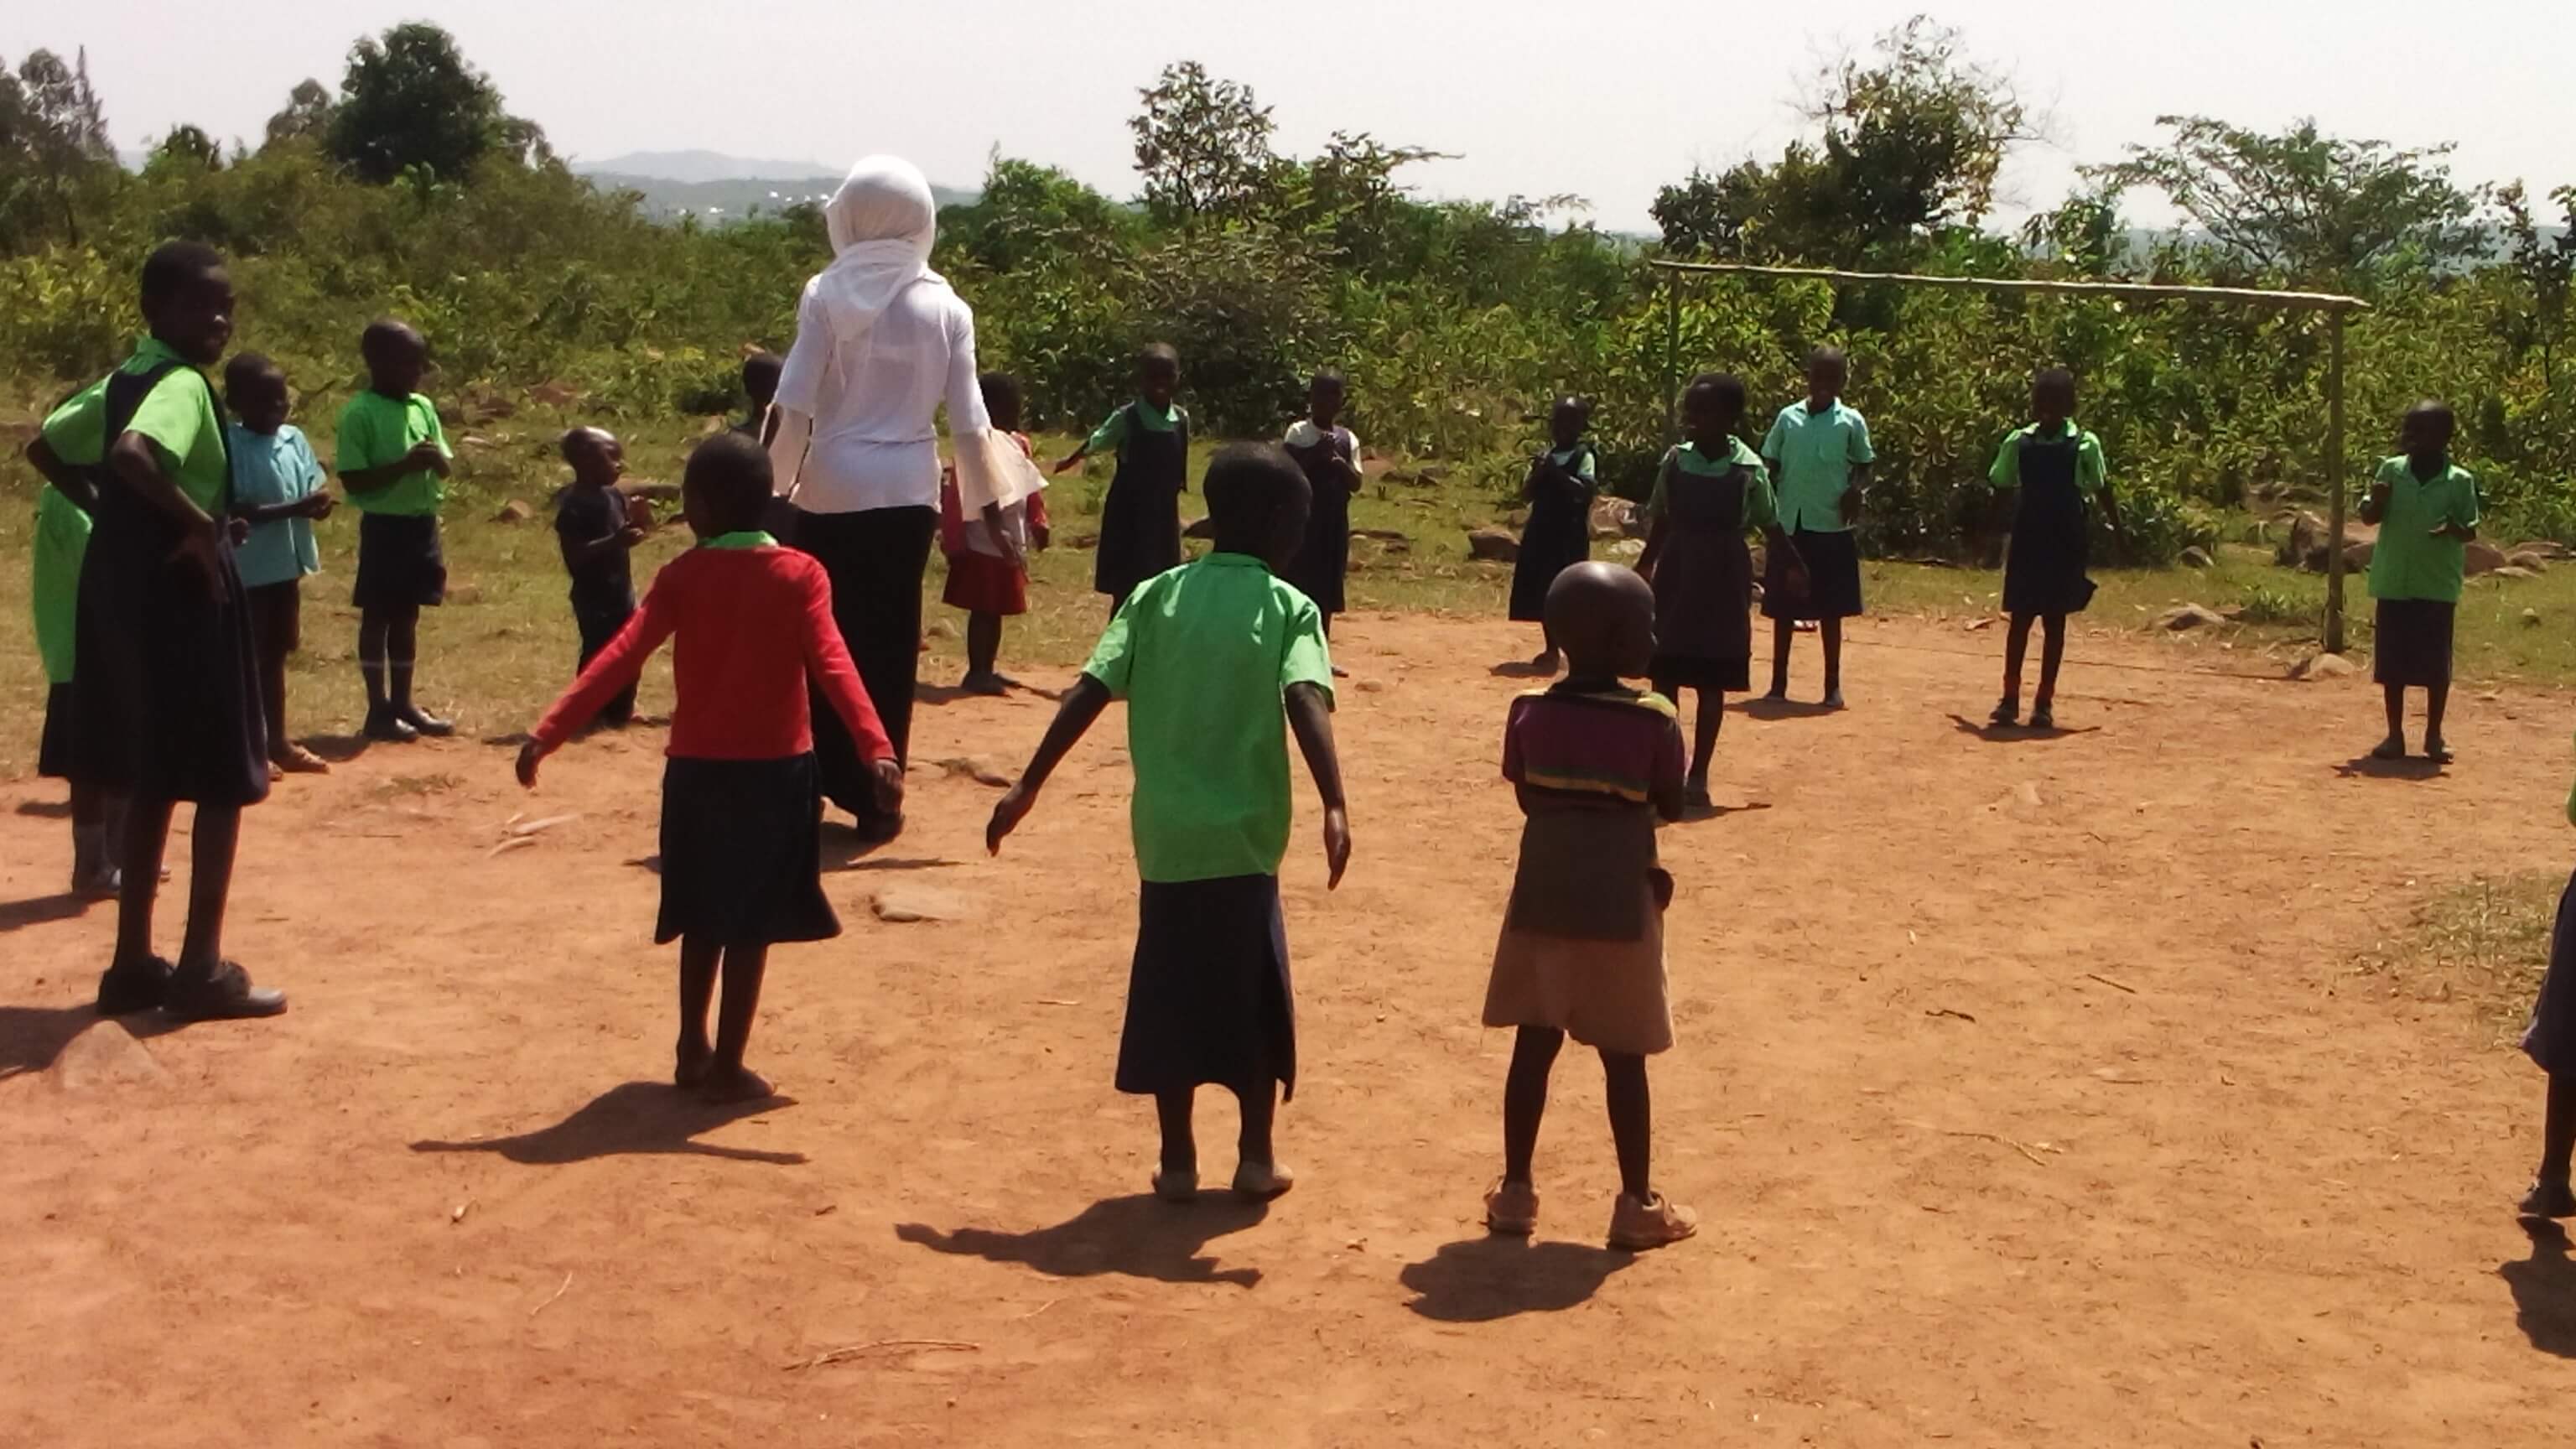 Challenges of Children playing at the Miruya Primary School